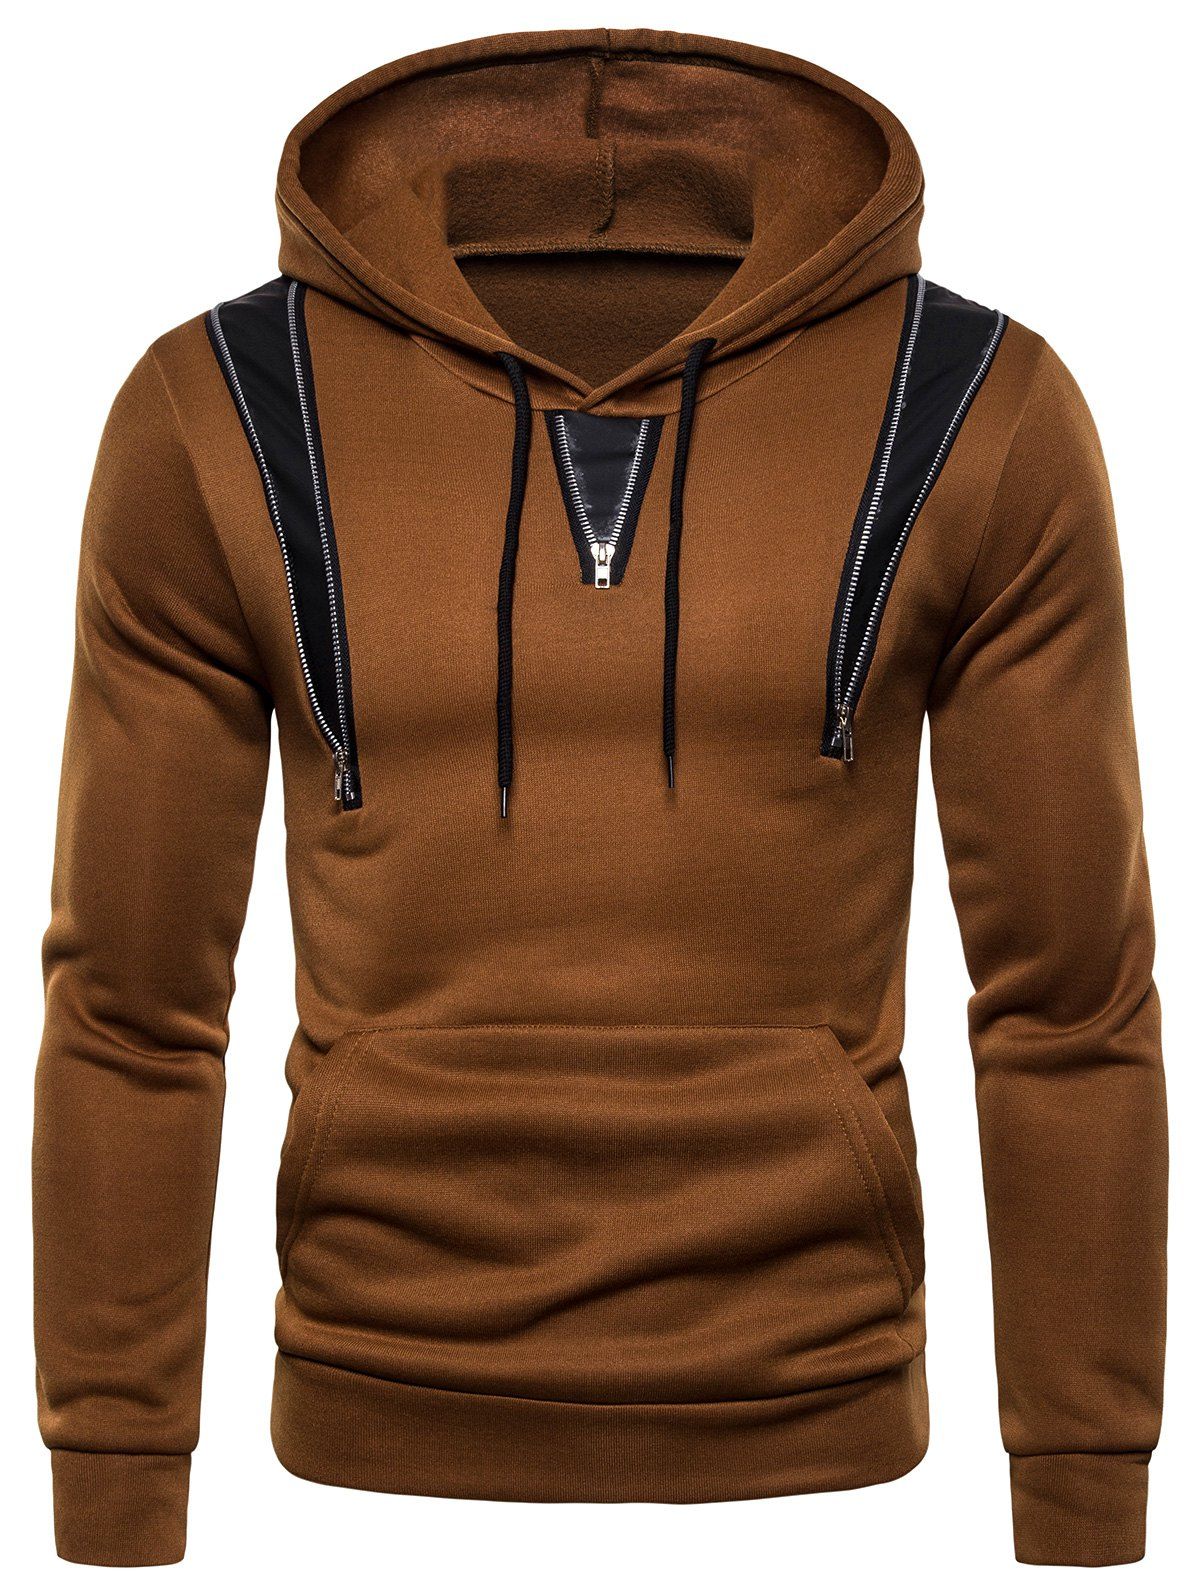 Zipper Decorated Color Spliced Casual Hoodie - BROWN BEAR 2XL